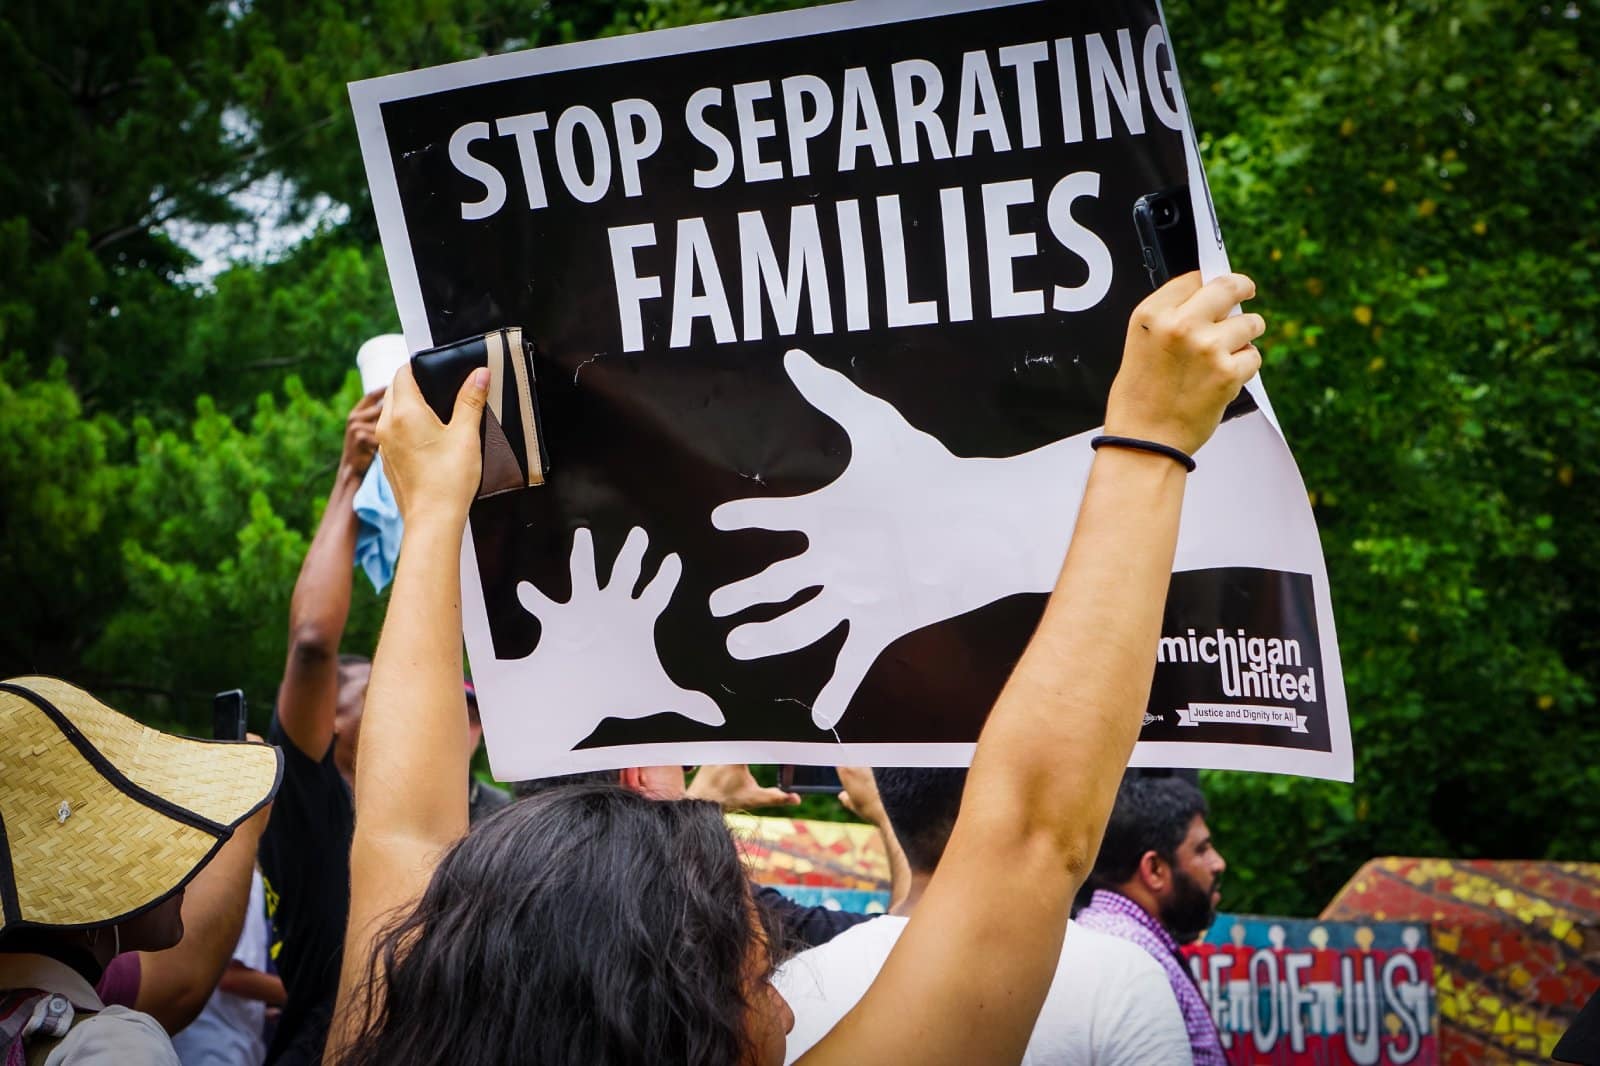 Image Credit: Shutterstock / Stephanie Kenner <p><span>Feminist responses to the treatment of migrant women at U.S. borders, including issues of detention and family separation, have sparked debates over the role of feminism in advocating for broader human rights issues.</span></p>